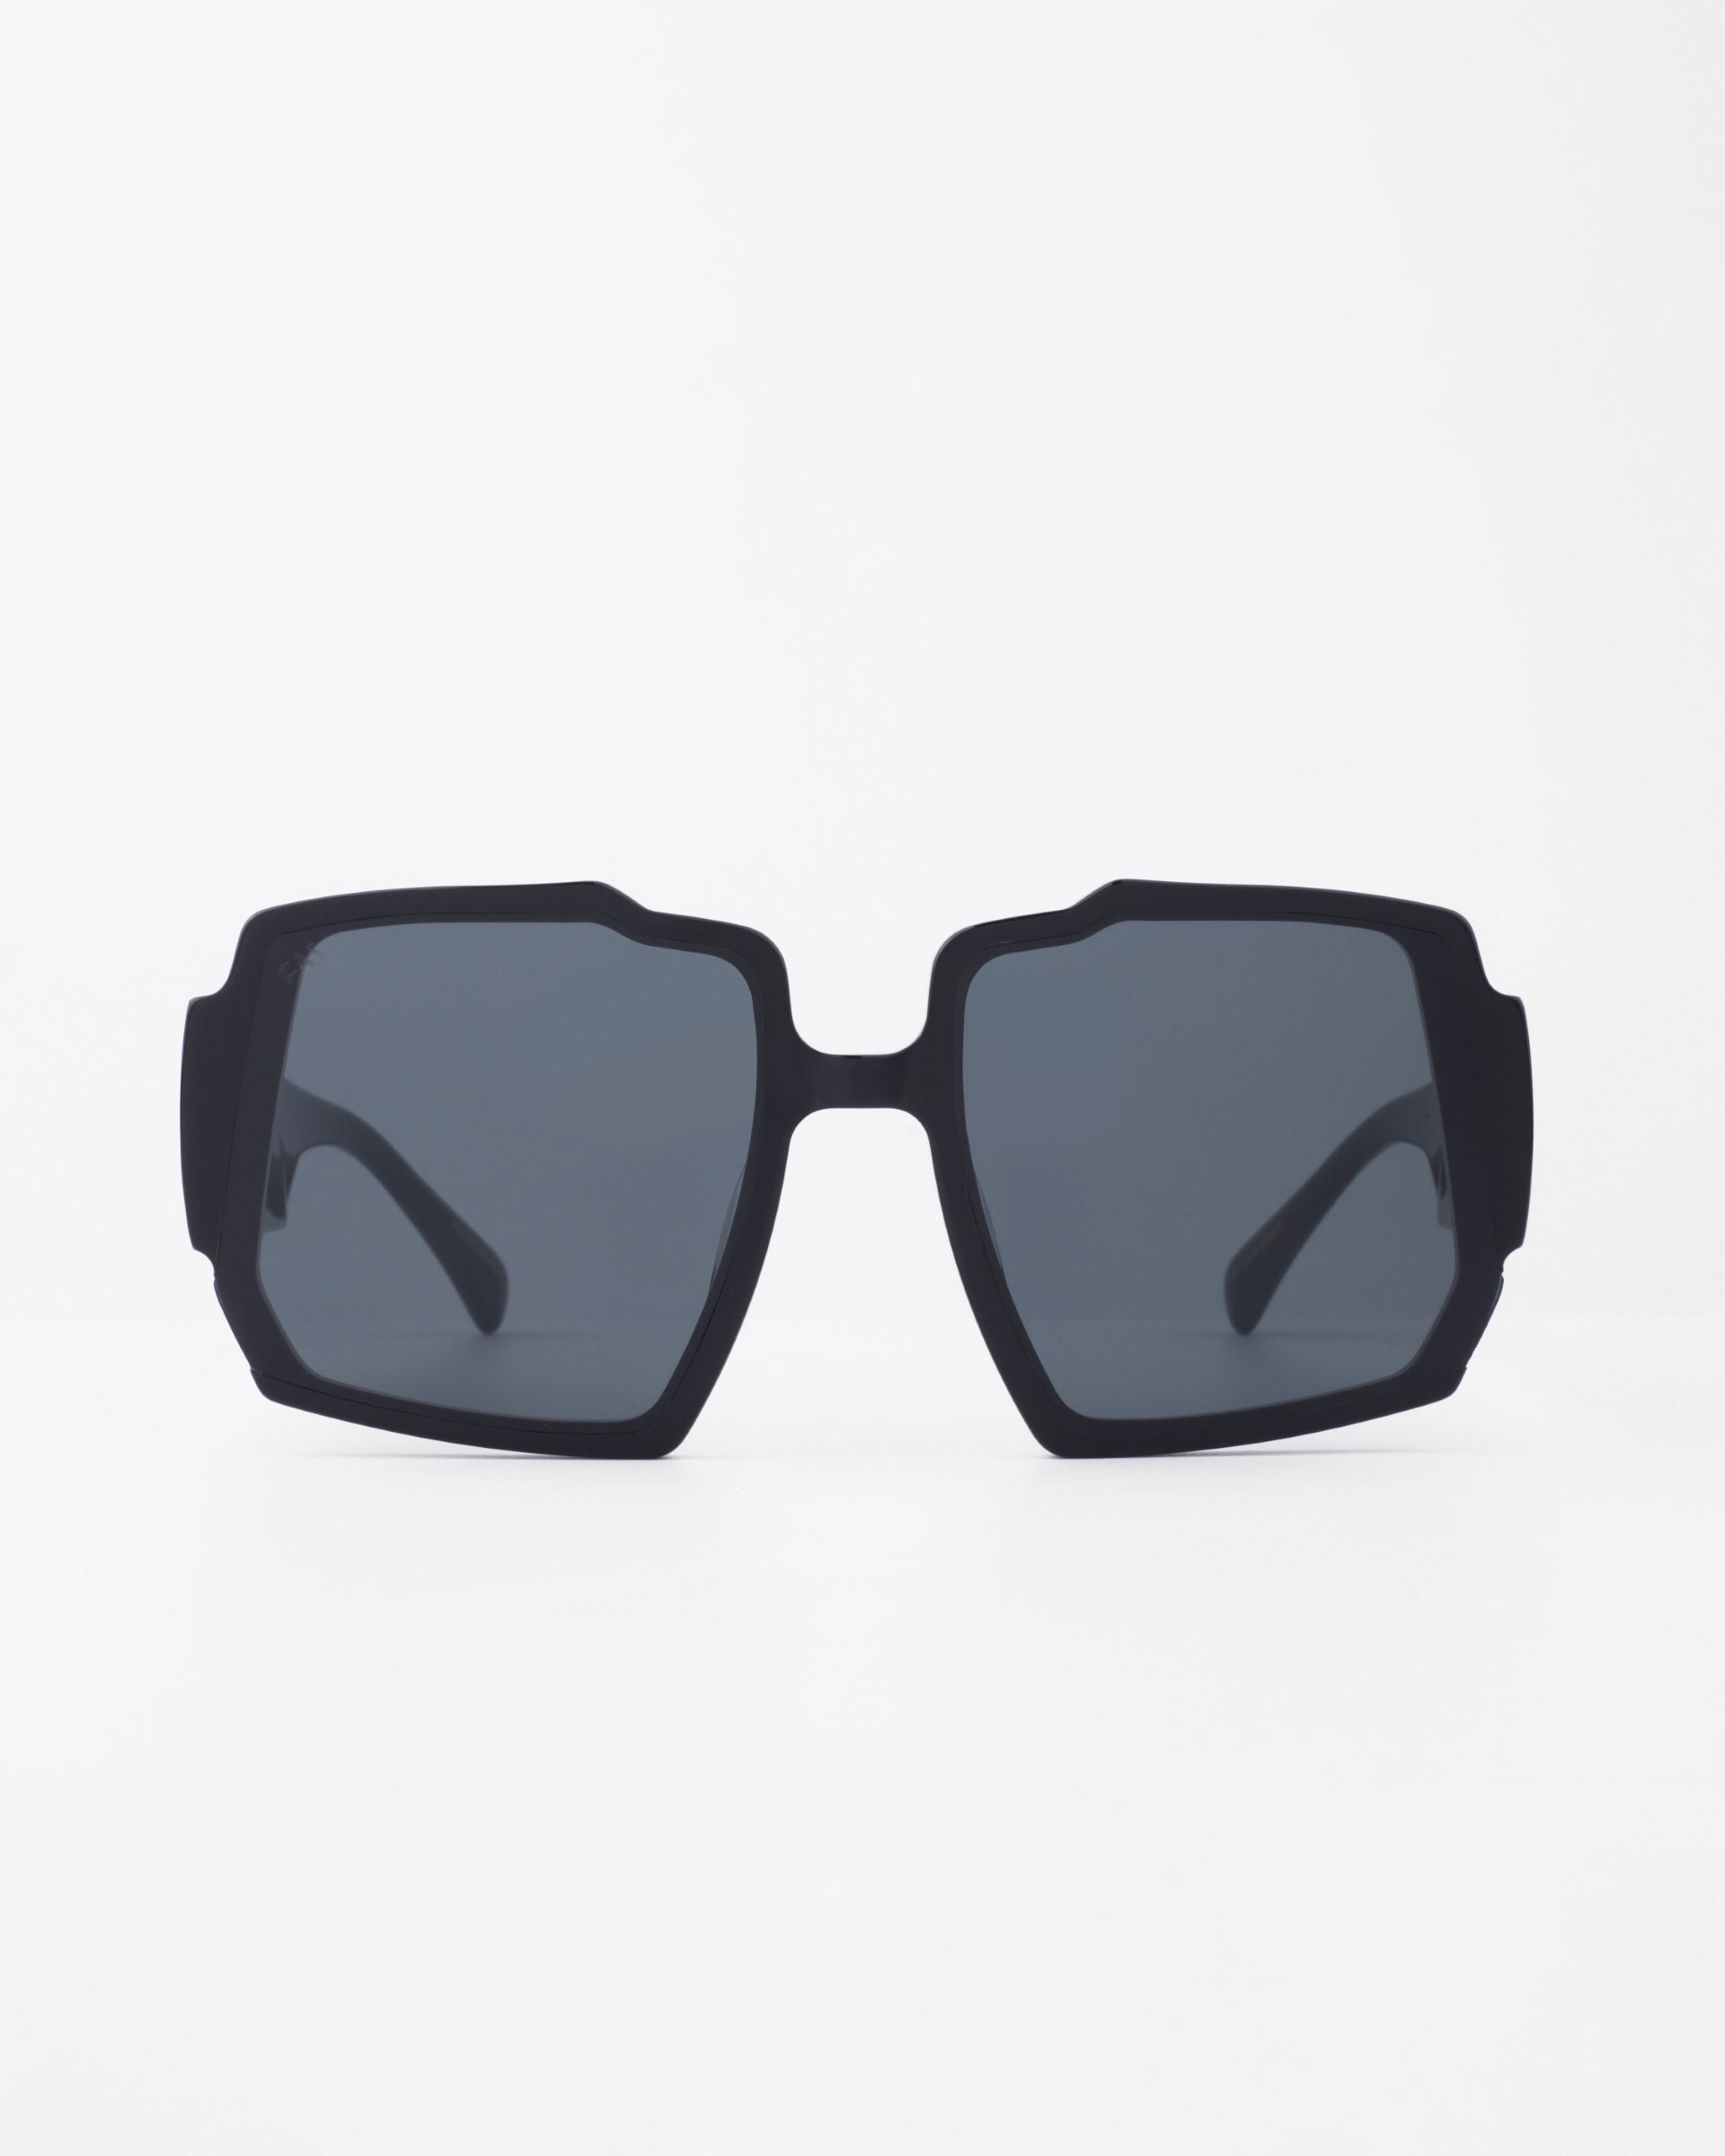 A pair of black, square-shaped For Art's Sake® Moritz sunglasses with chunky acetate frames and UV-protected dark lenses is displayed against a plain white background.